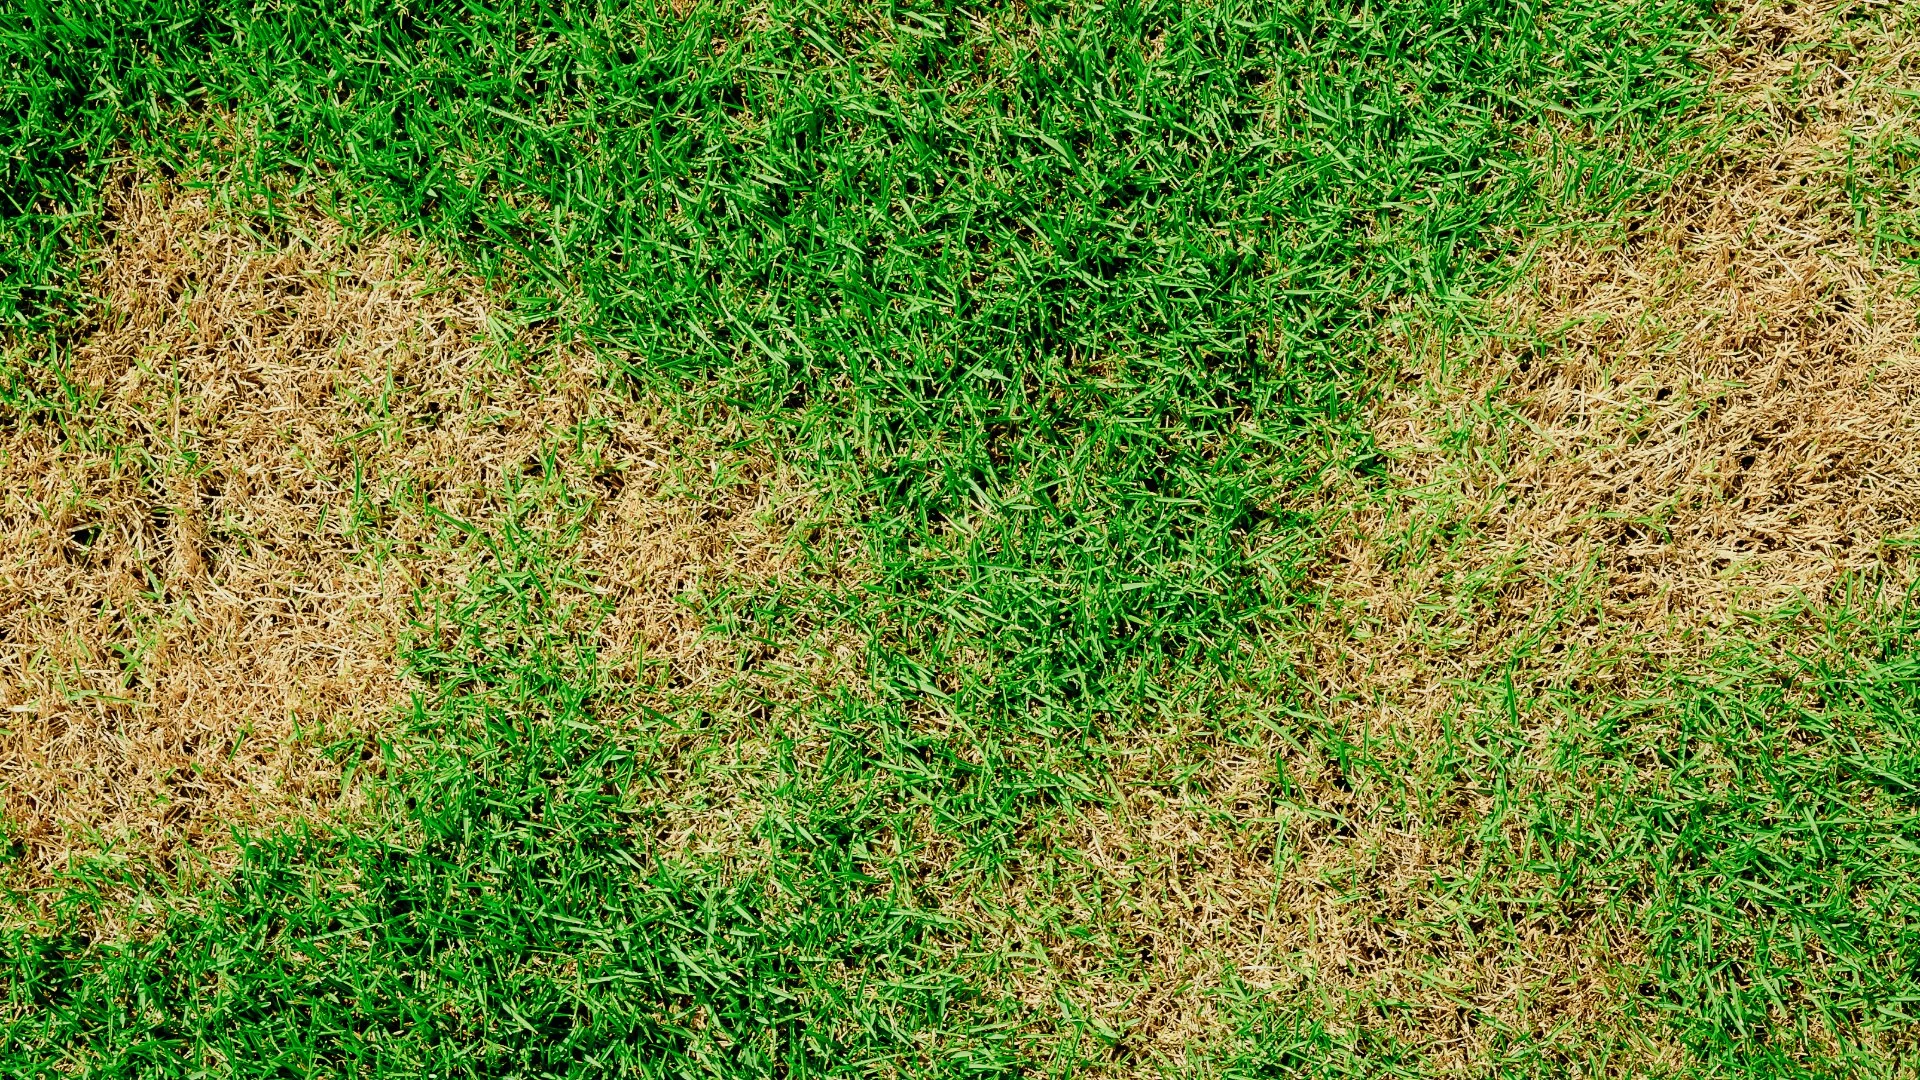 Has Brown Patch Infected Your Turf? Don’t Panic - Here’s What You Should Do